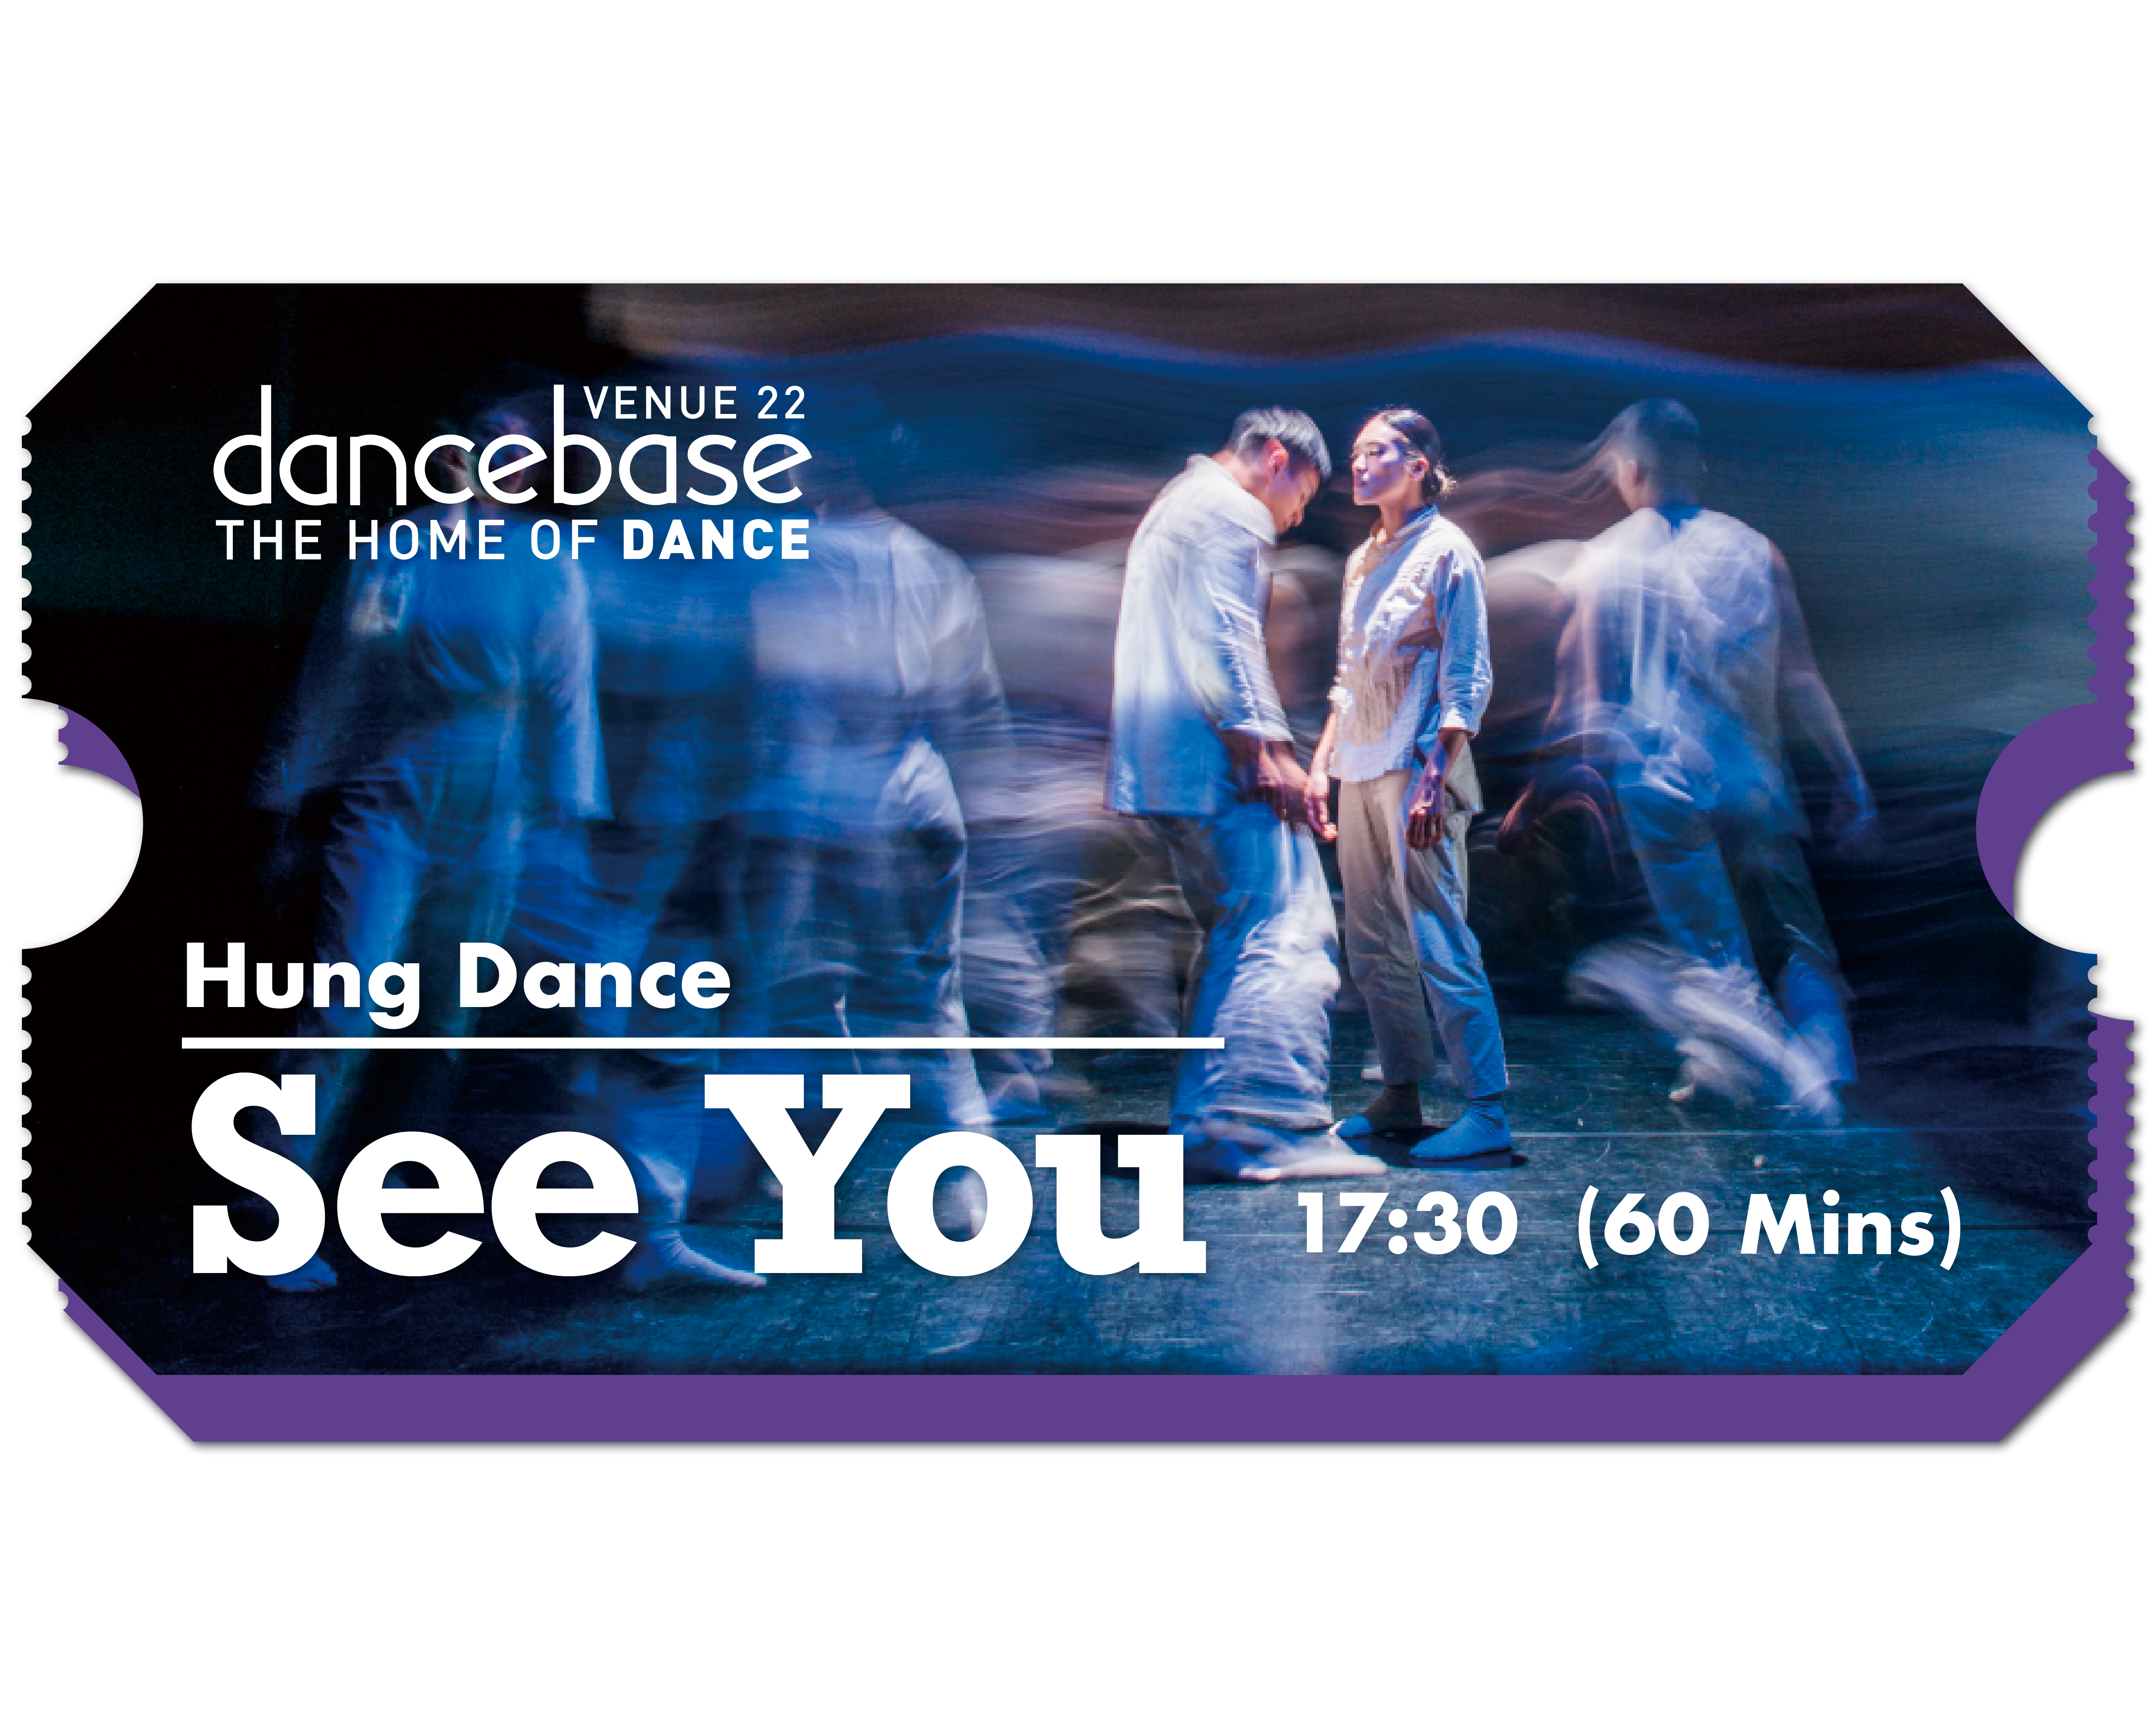 See You - Hung Dance